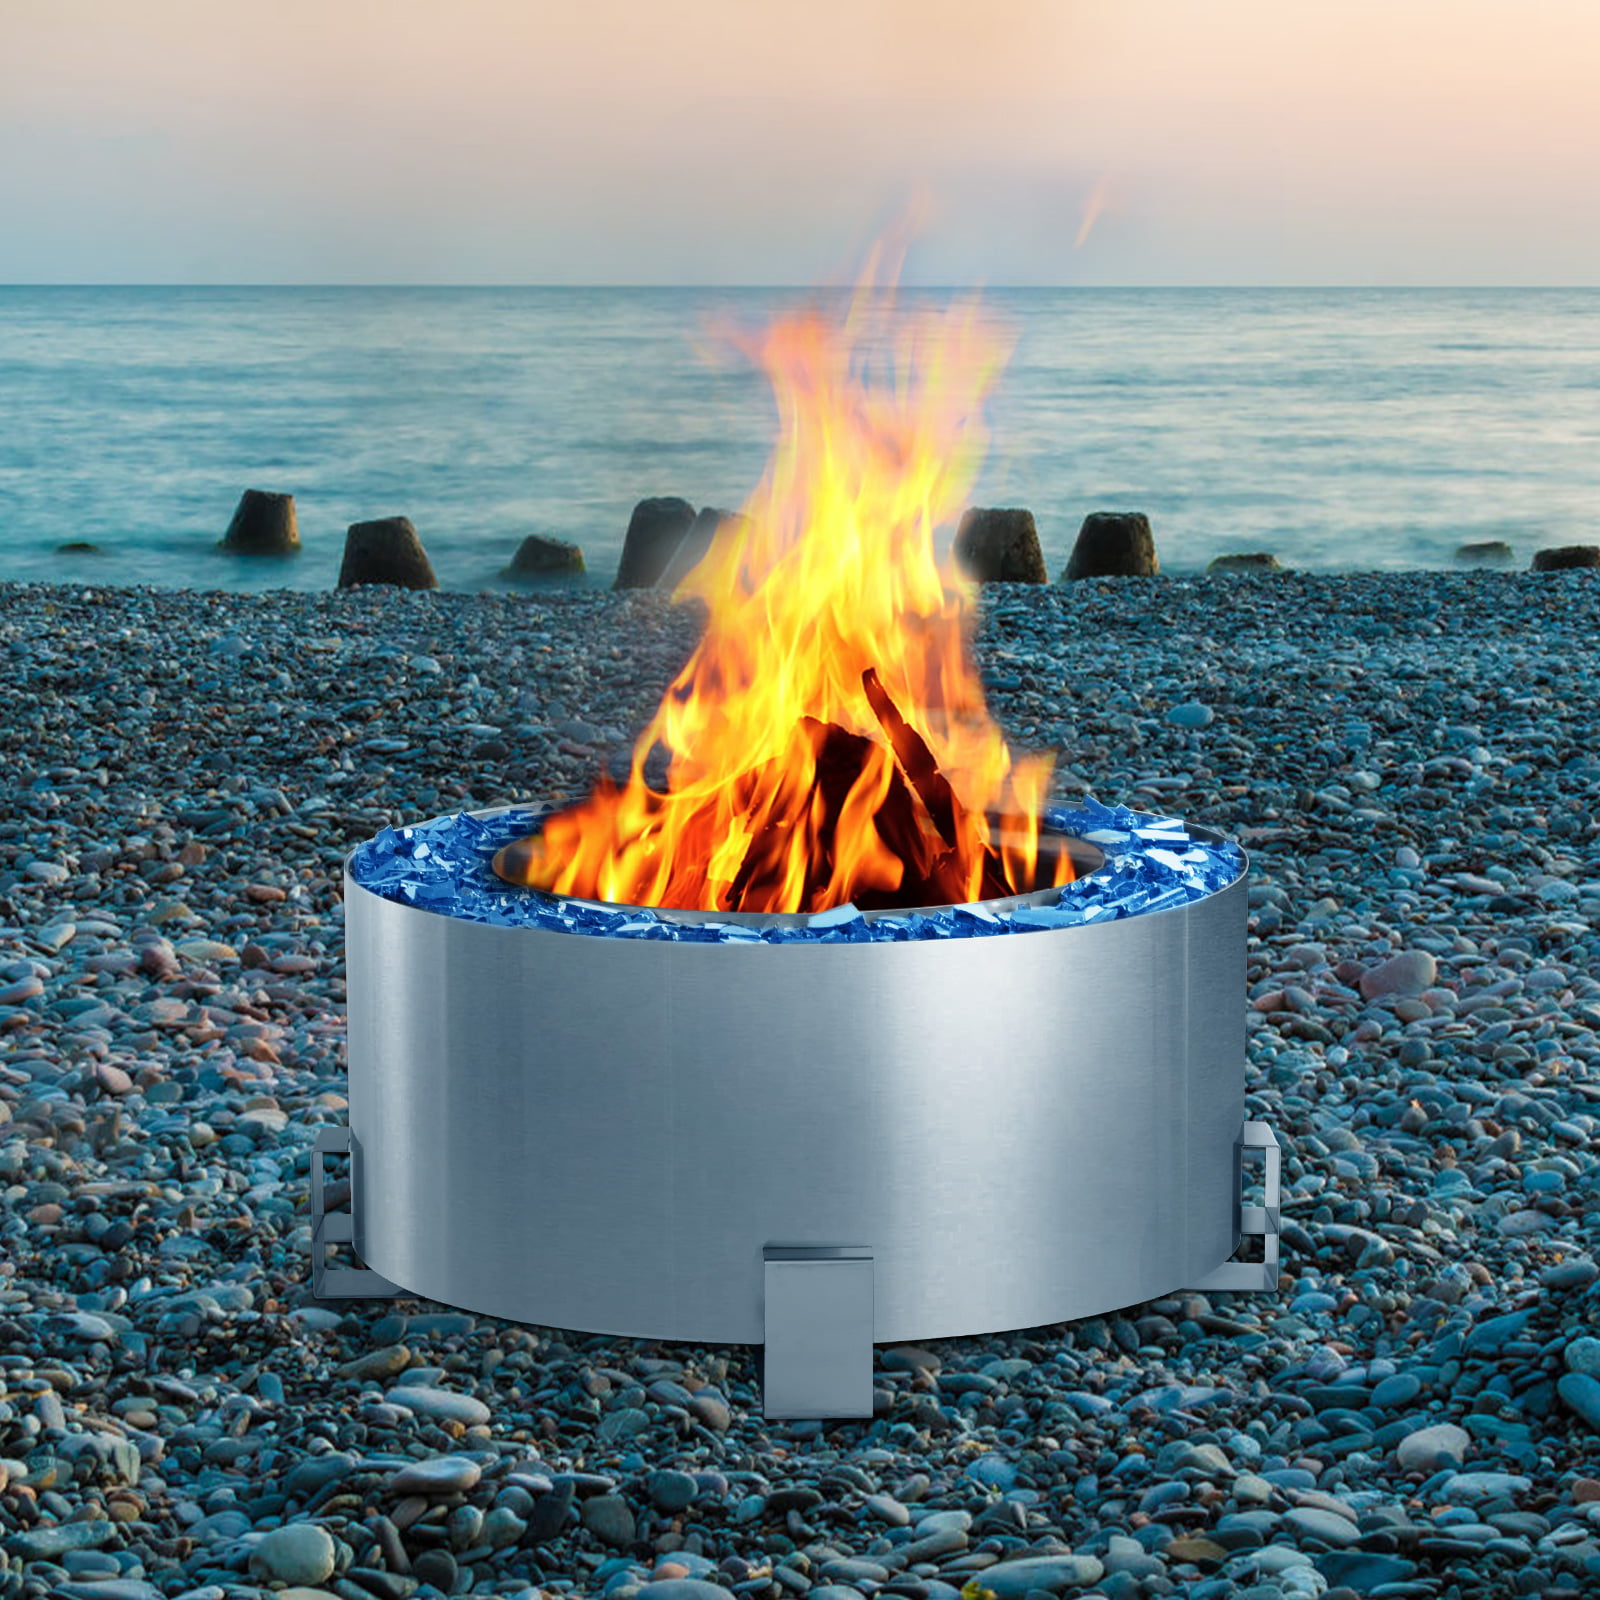 Danrelax 28 5 Fire Pit Outdoor, Disposable Fire Pit